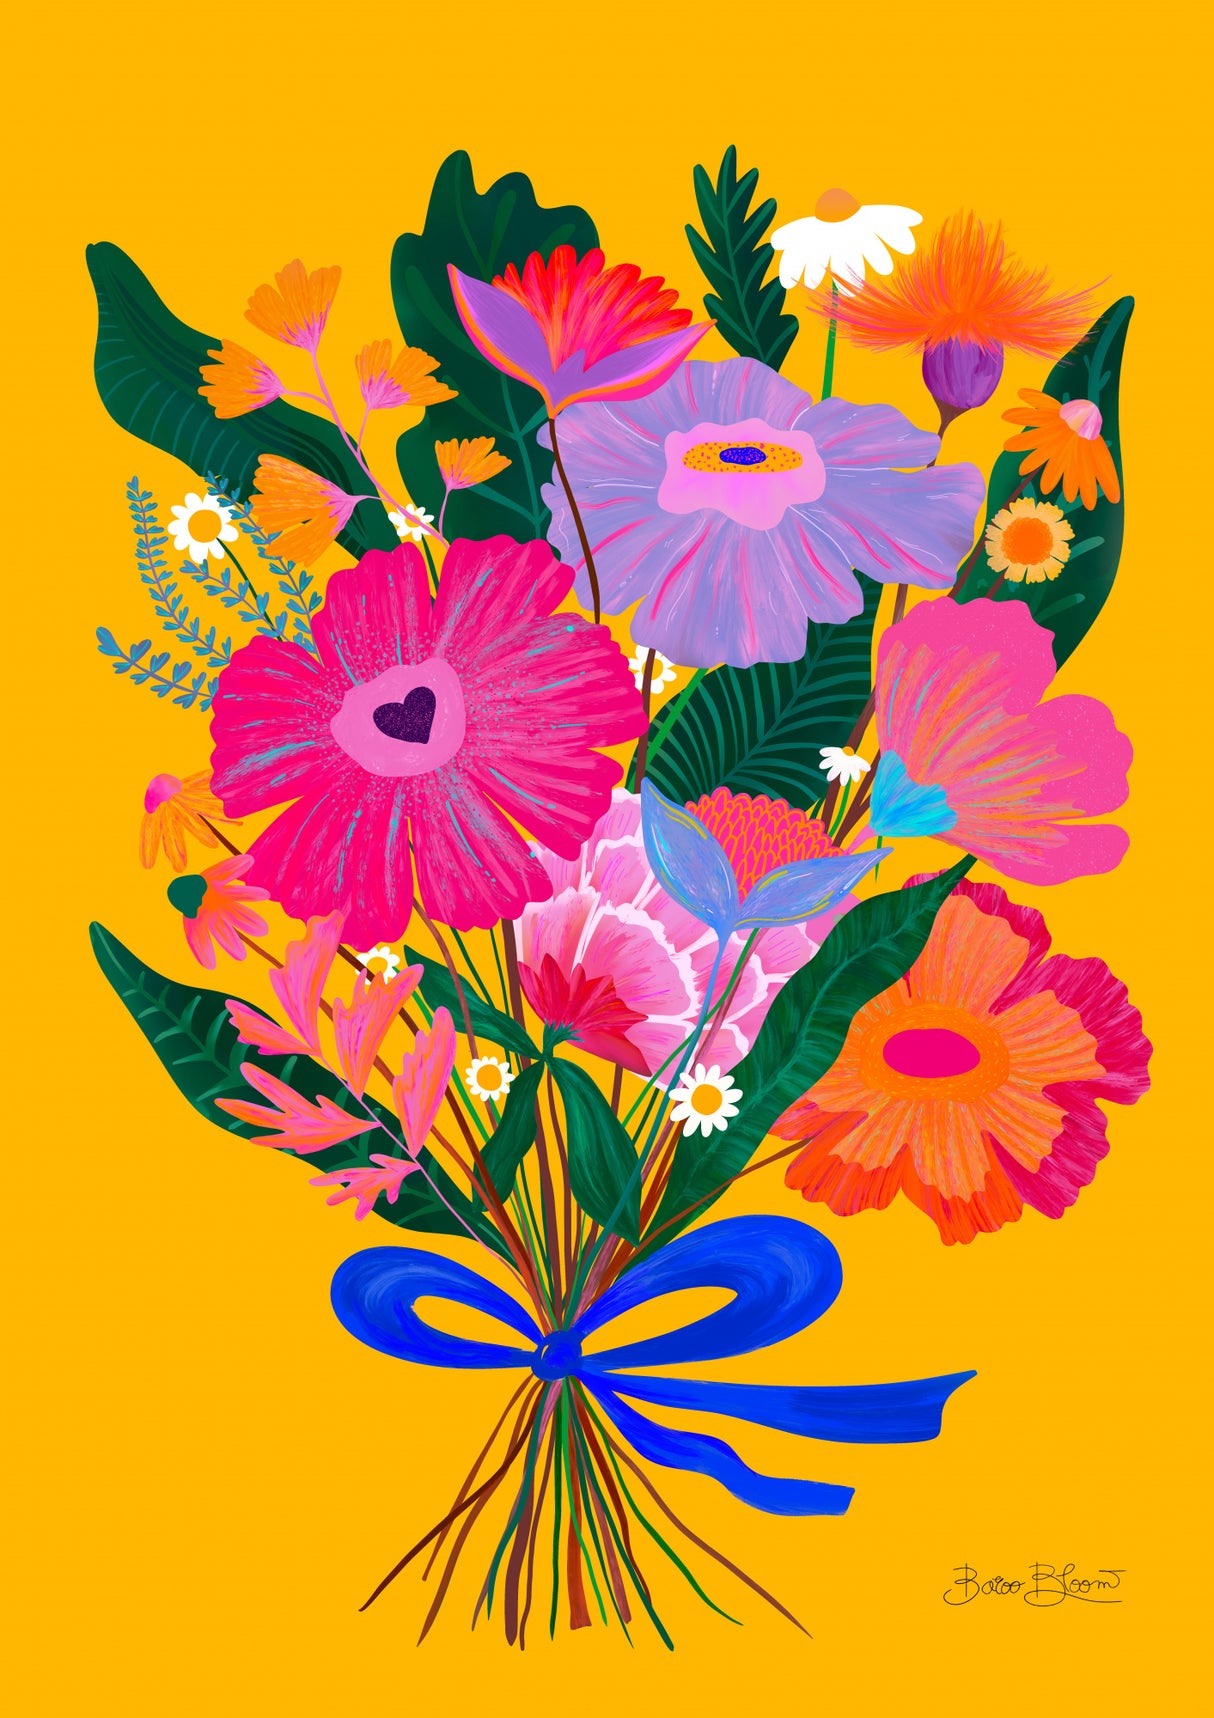 Eclectic Flowers Poster och Canvastavla